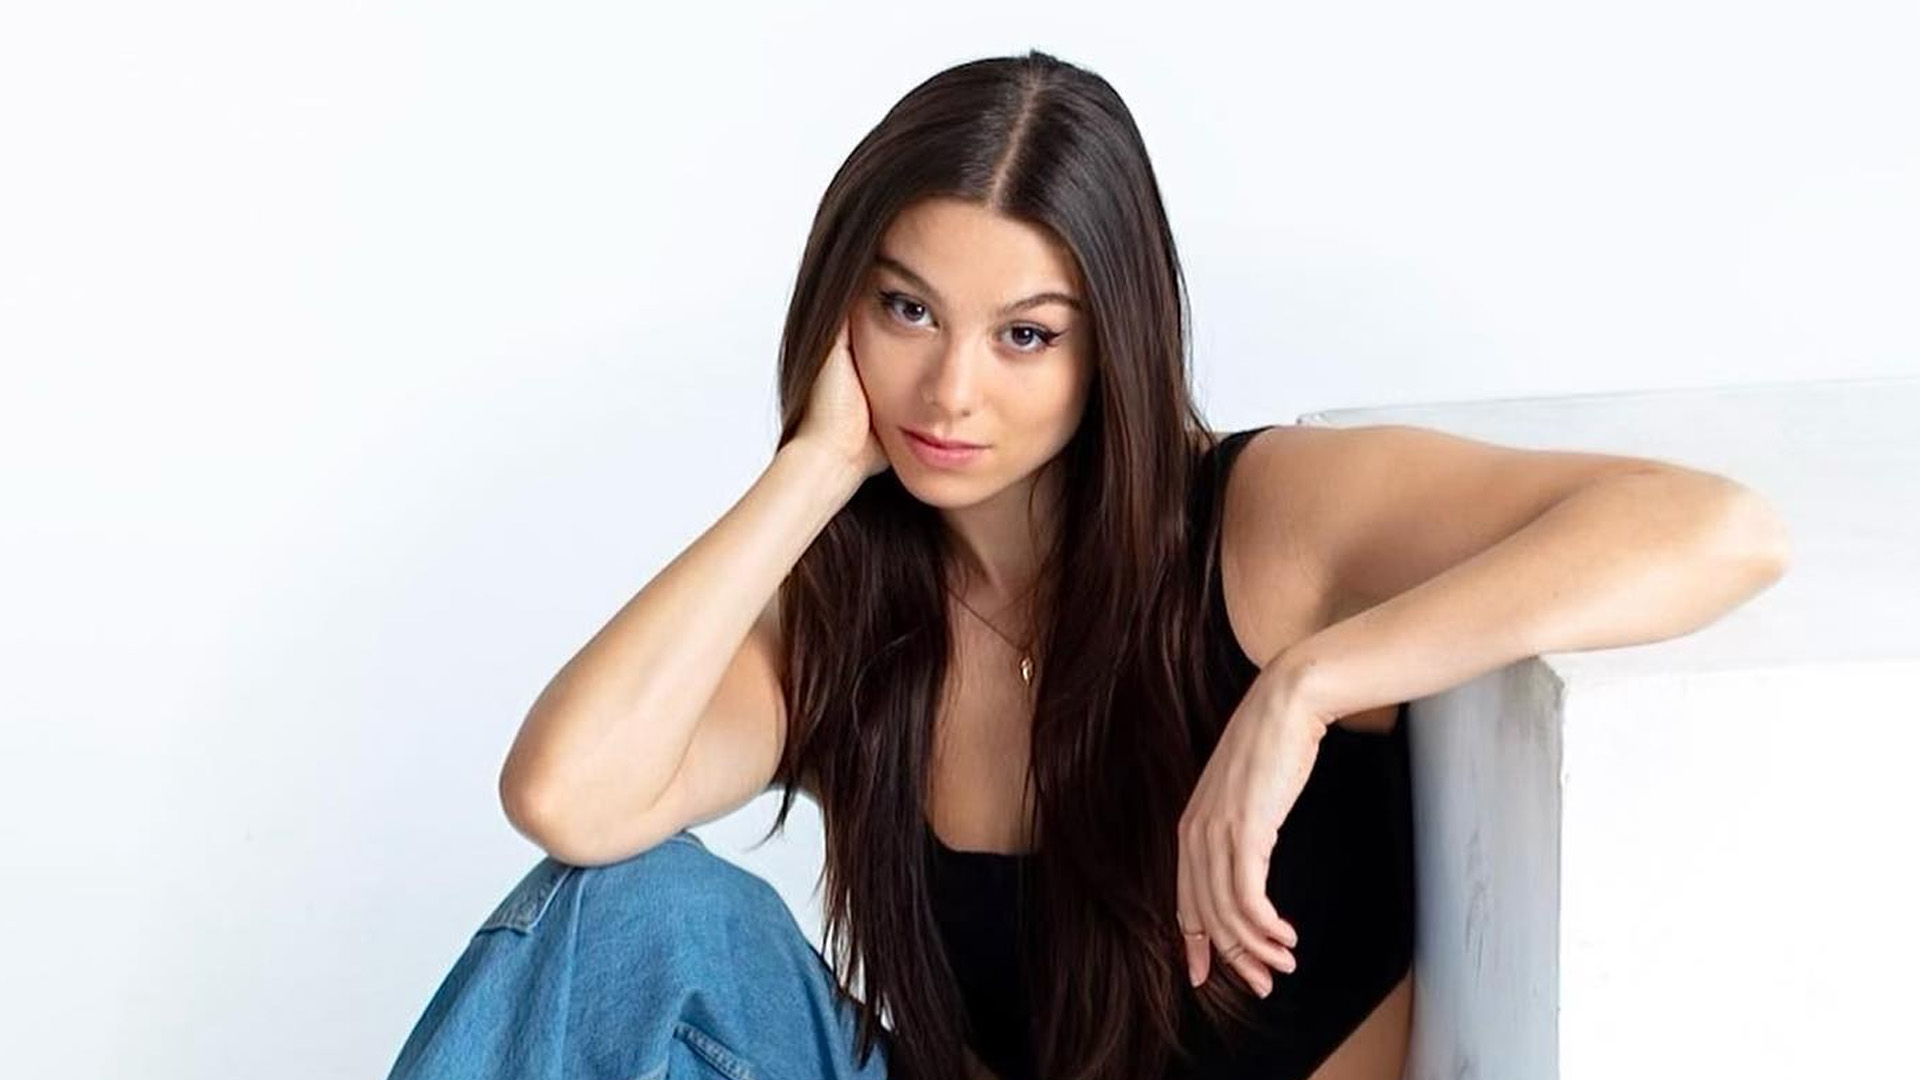 Who Is Kira Kosarin And How Does She Look Now?